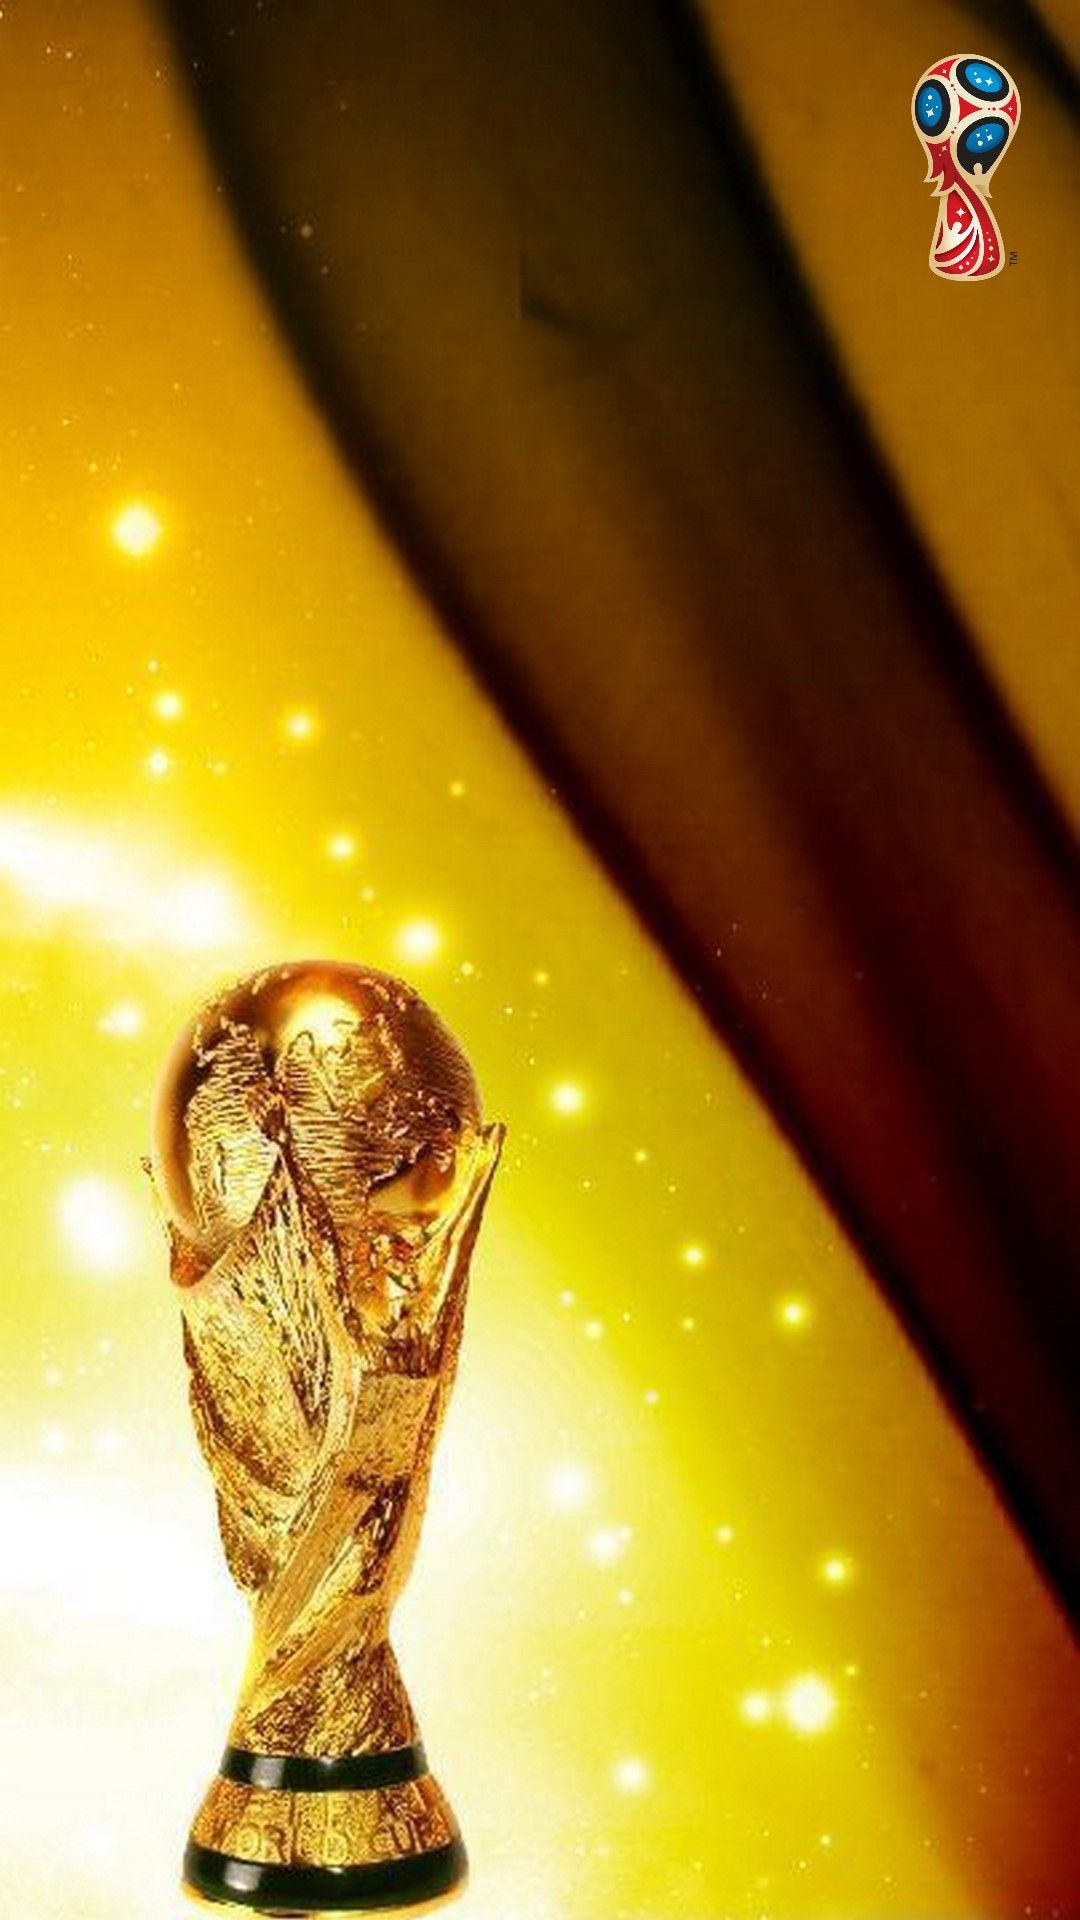 30+ 2022 FIFA World Cup HD Wallpapers and Backgrounds